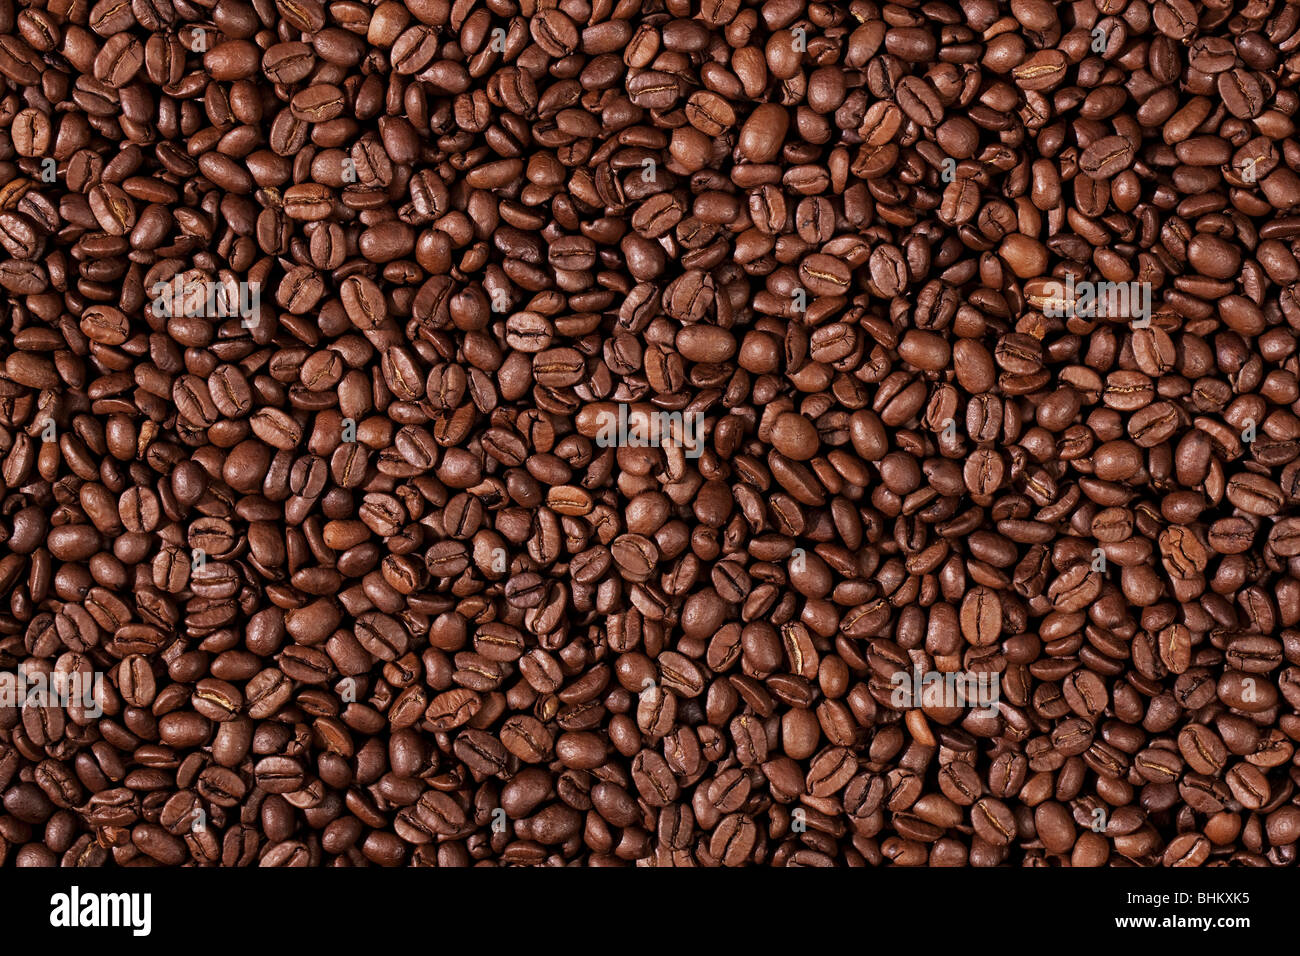 Background image of coffee beans filling the picture Stock Photo